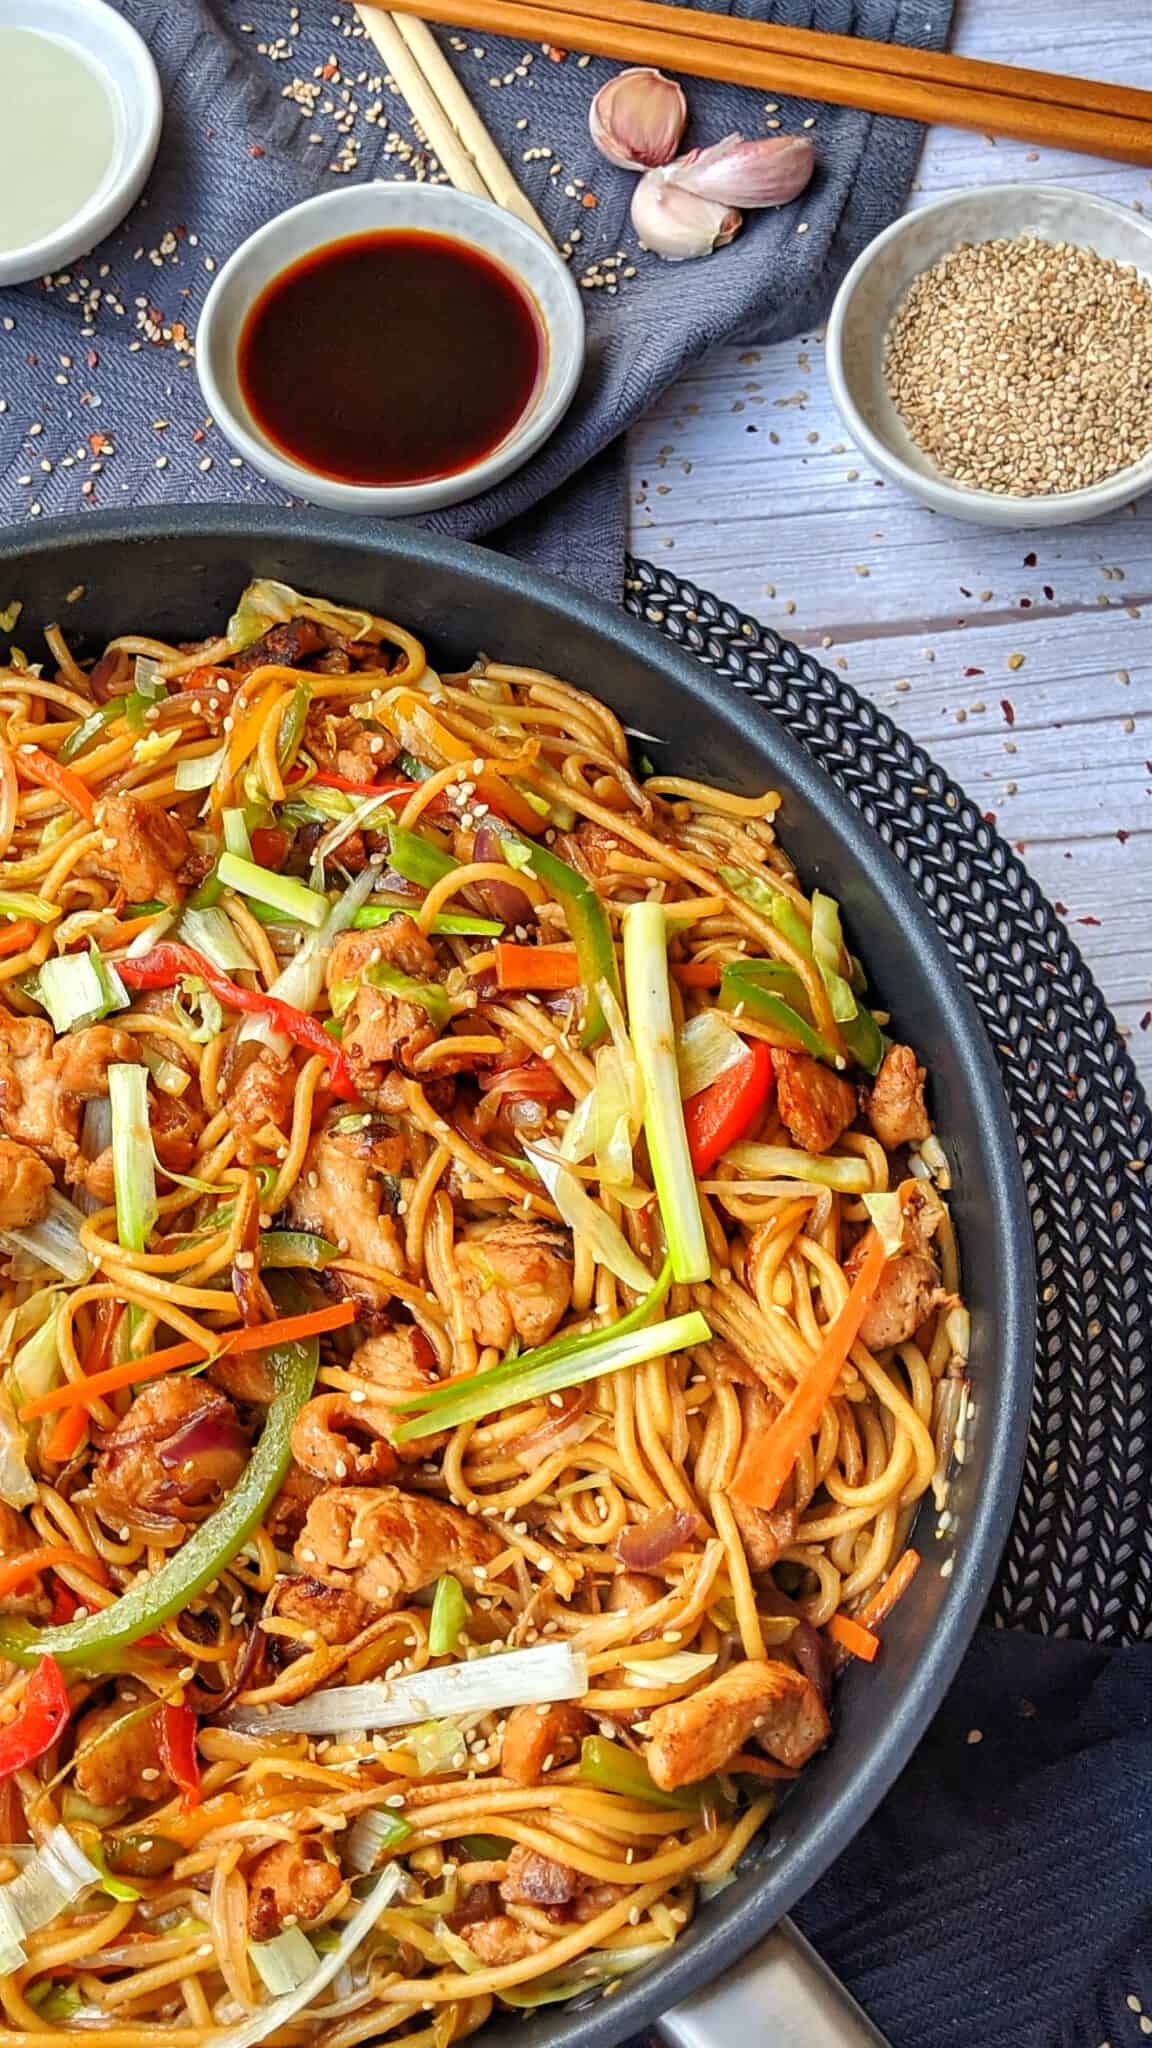 A pan with a chicken Chow Mein. Behind it, a small dish with soy sauce and sesame seeds, as well as decoration.